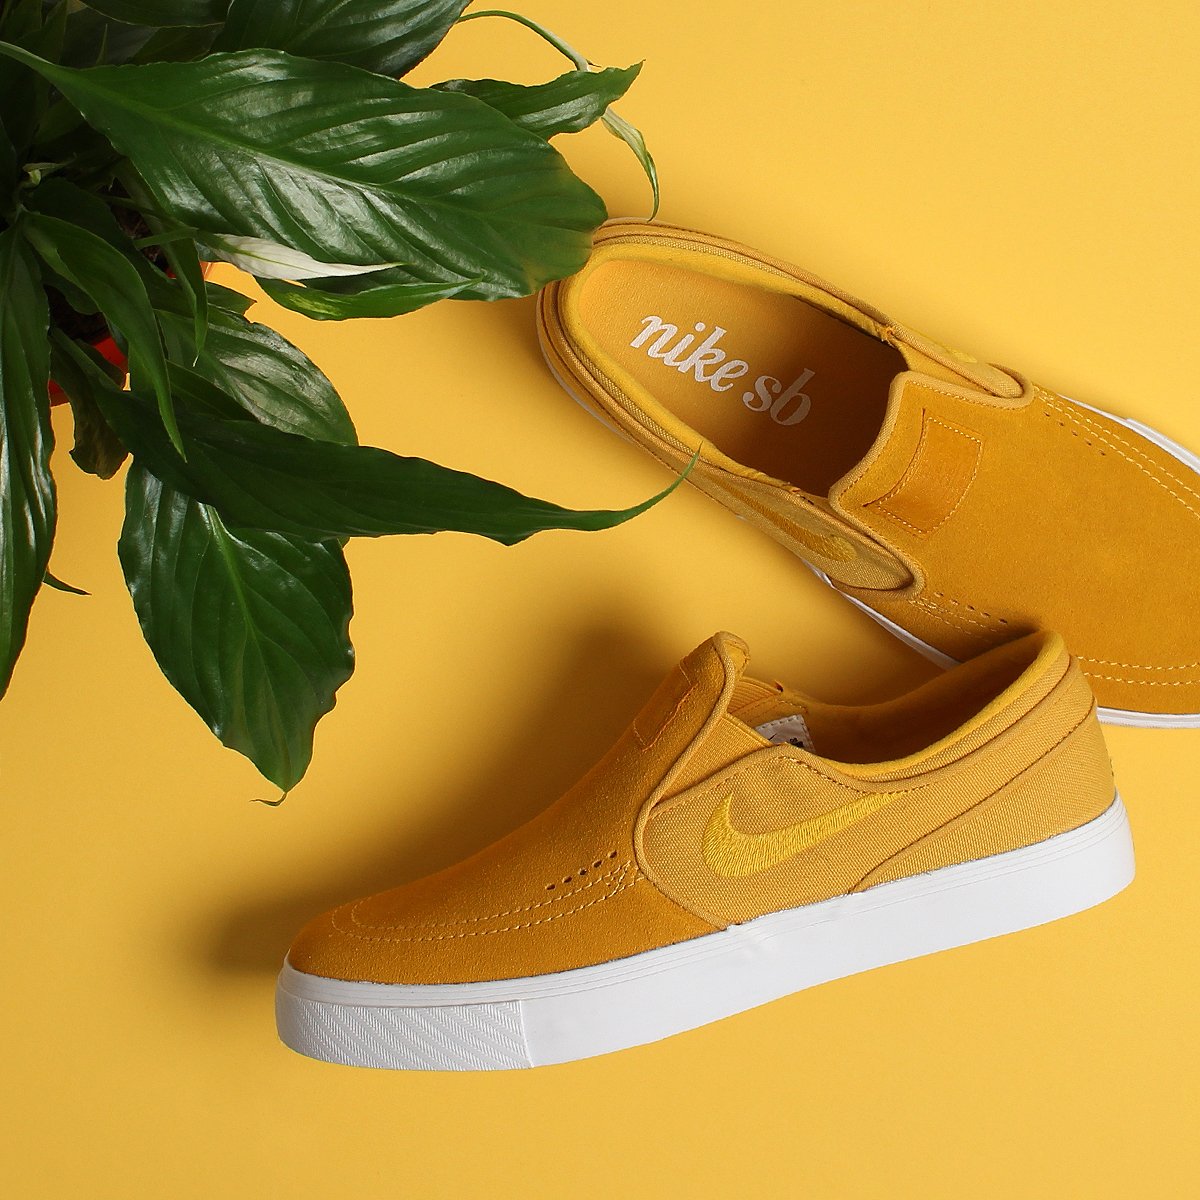 Ingresos musicas materno Urban Industry on Twitter: "From the mind of an innovative skate legend  comes the Nike SB Zoom Stefan Janoski Slip On Shoe now in Yellow Ochre! A  signature style with a low-profile